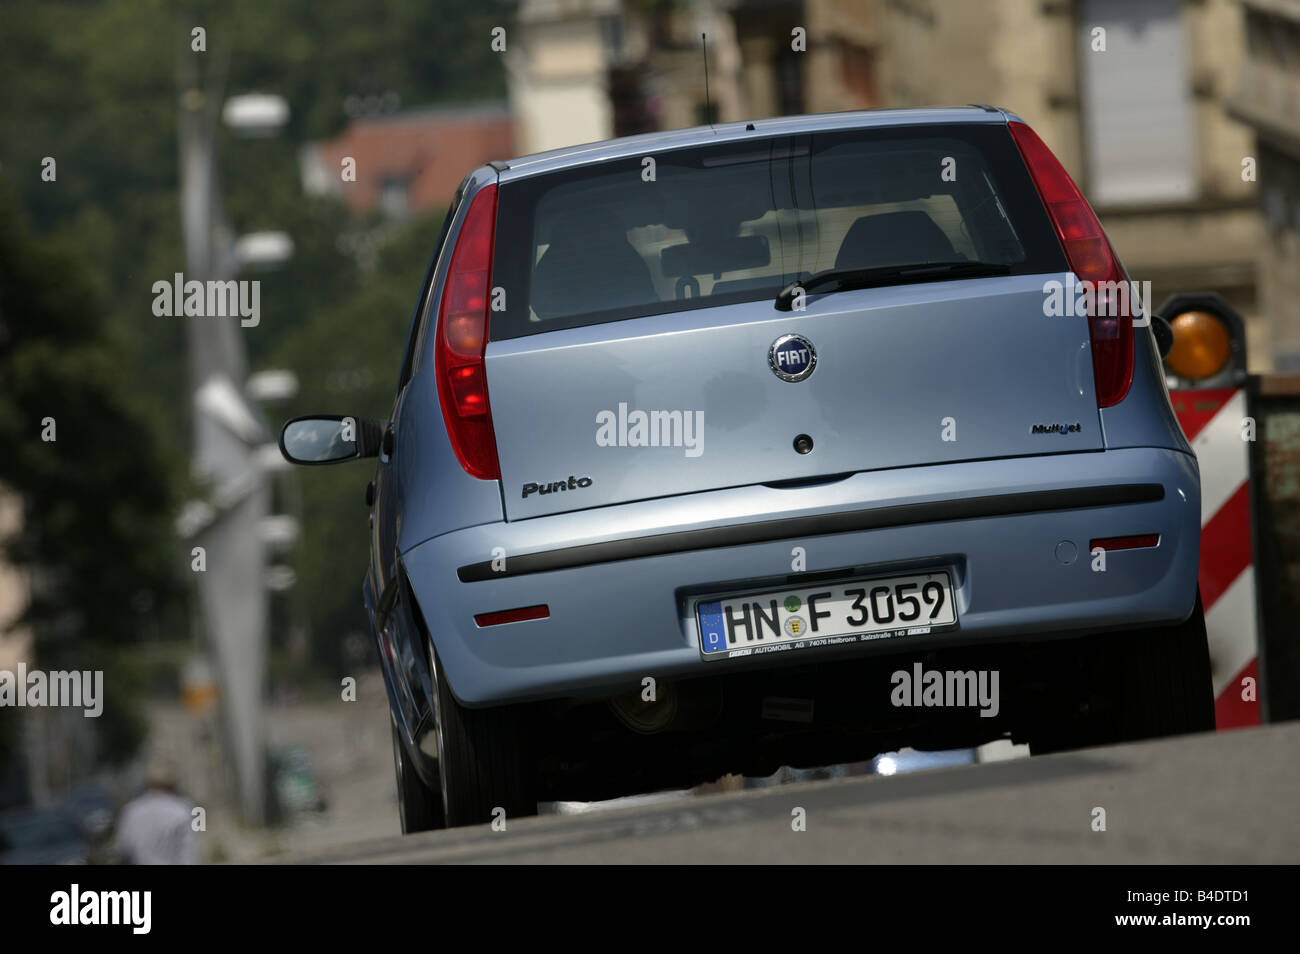 Car, Fiat Punto 1.3 JTD, small approx., Limousine, light blue-metallic,  driving, City, diagonal from the back, Rear view Stock Photo - Alamy